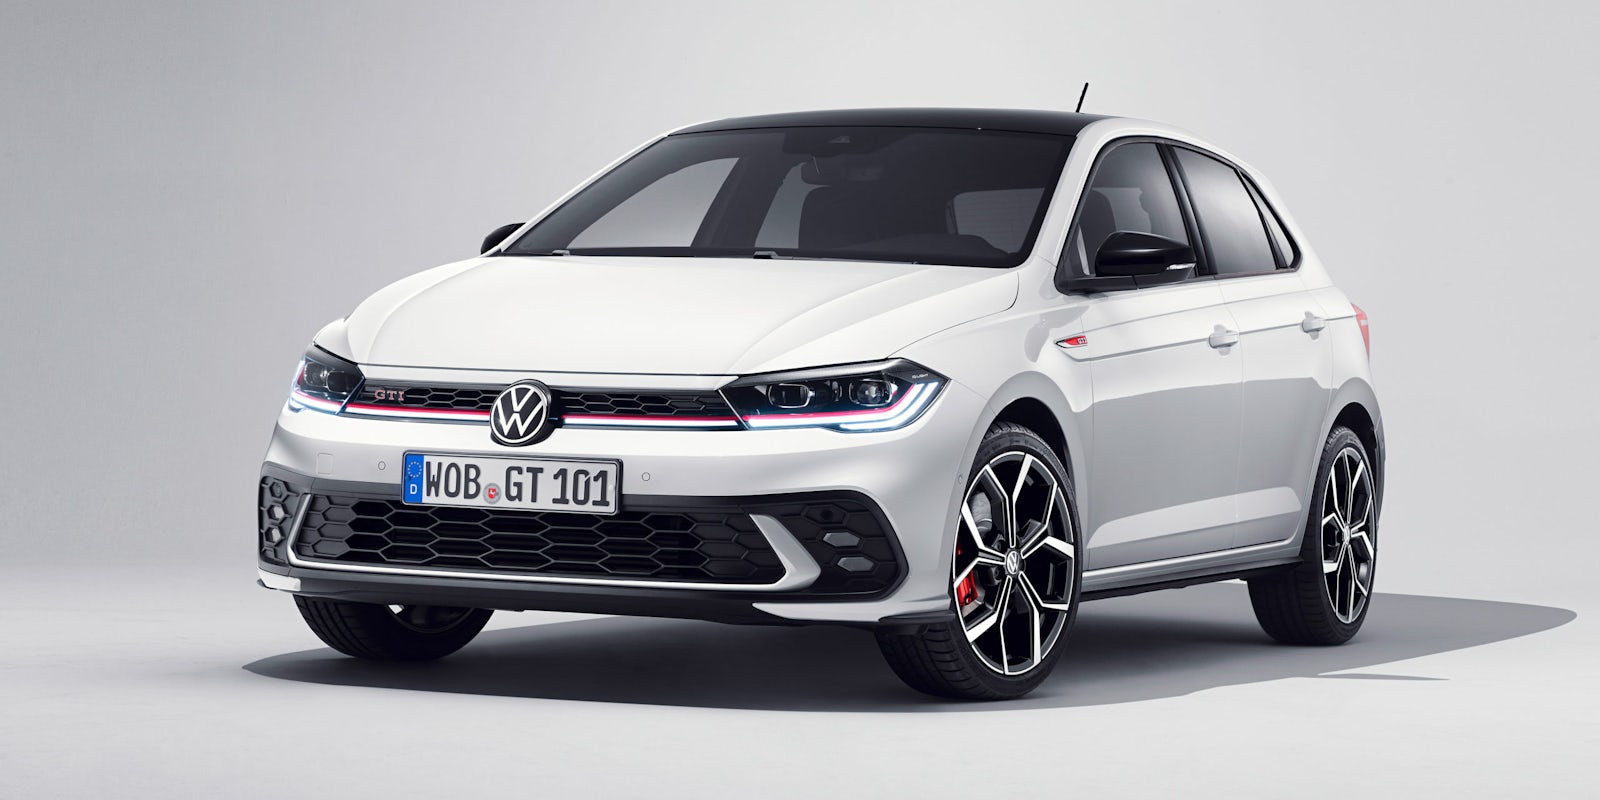 2022 Volkswagen Polo GTI spotted price, specs and release date carwow